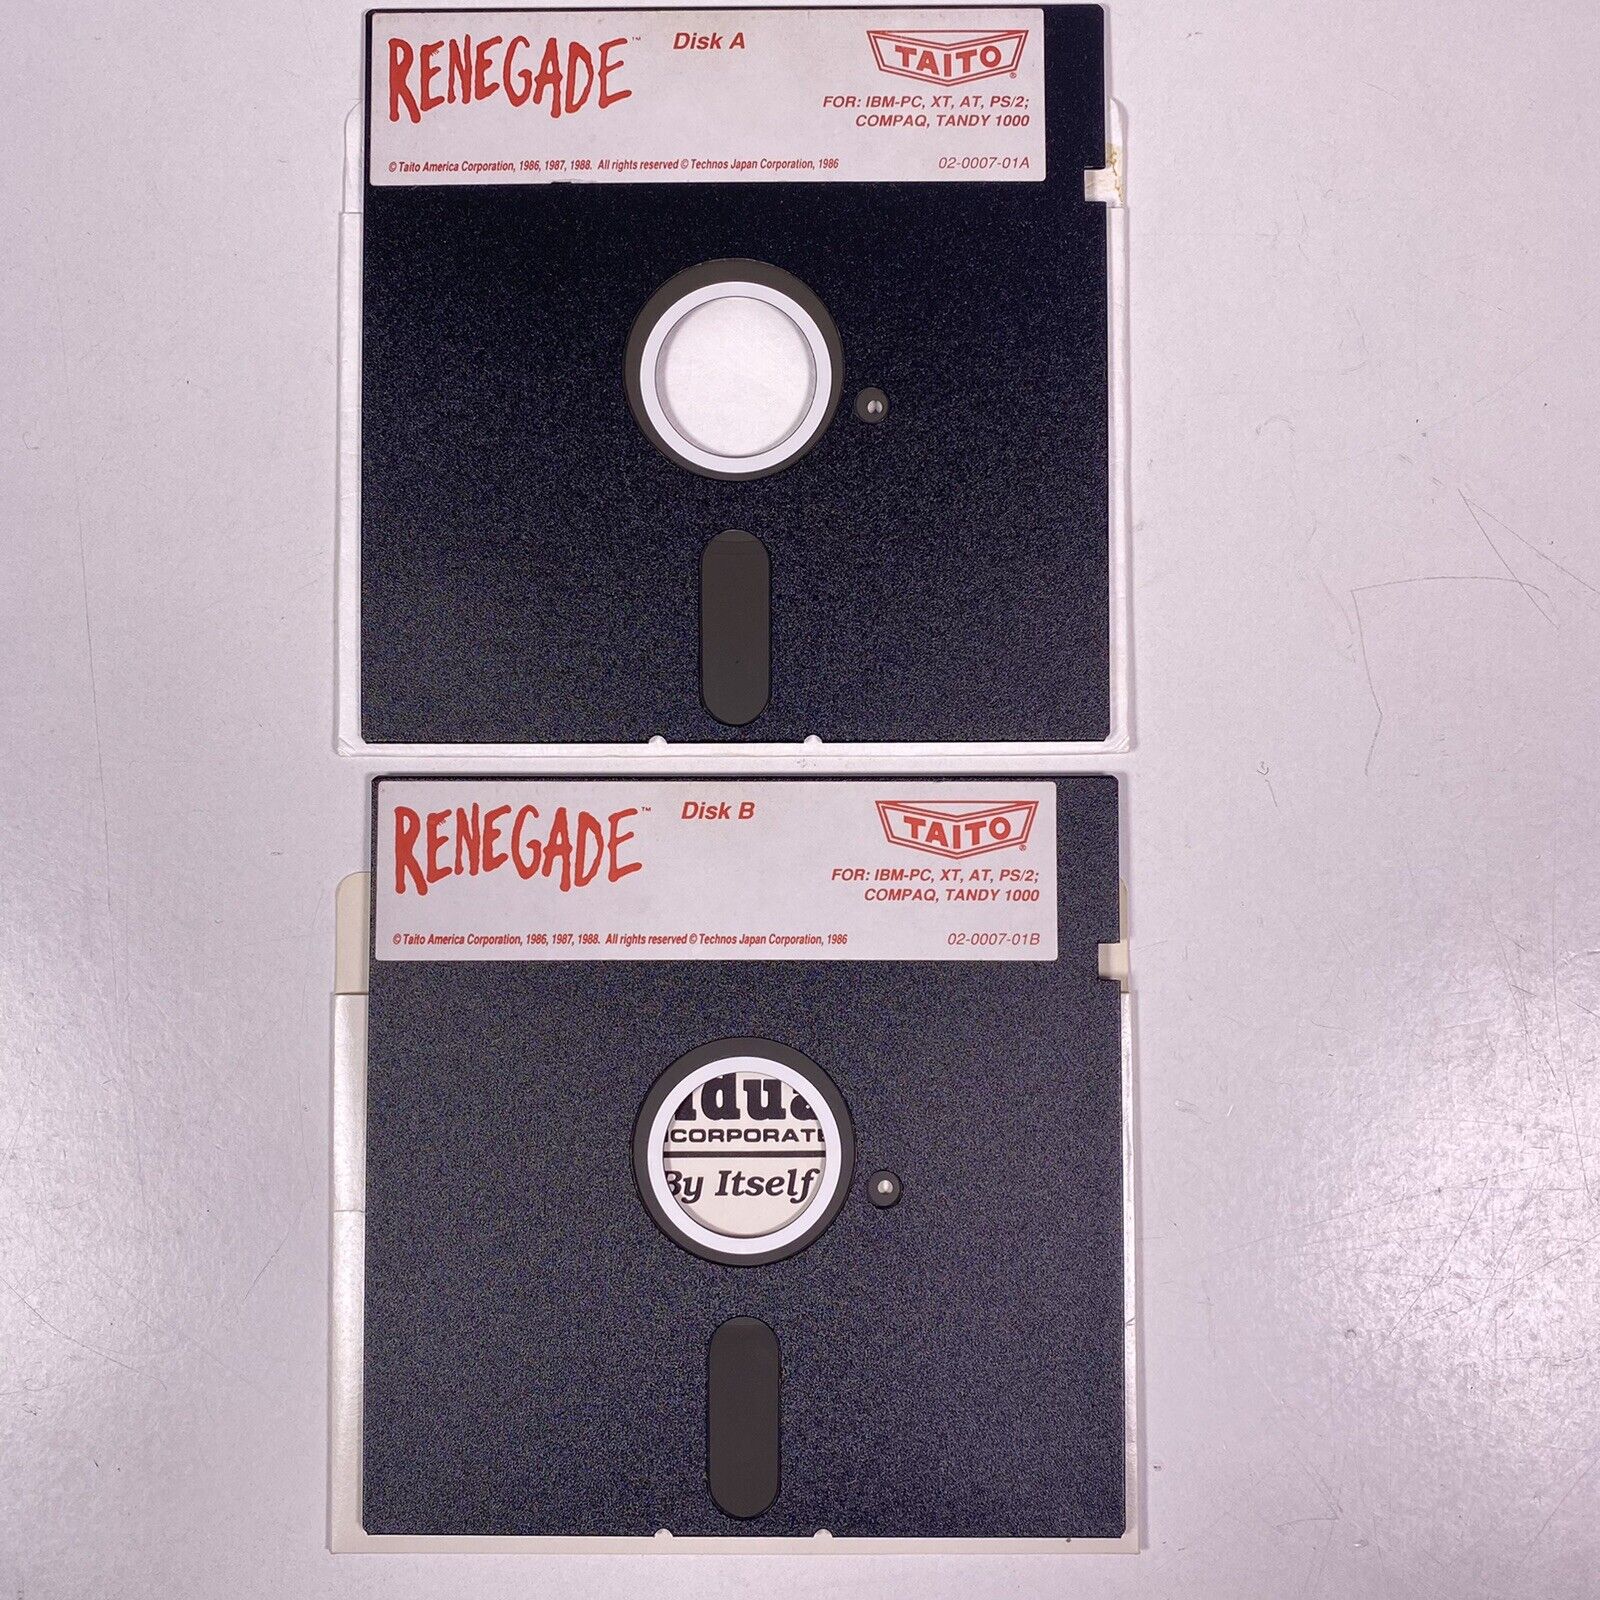 Renegade Taito Disk A & B Ony For IBM PC Software